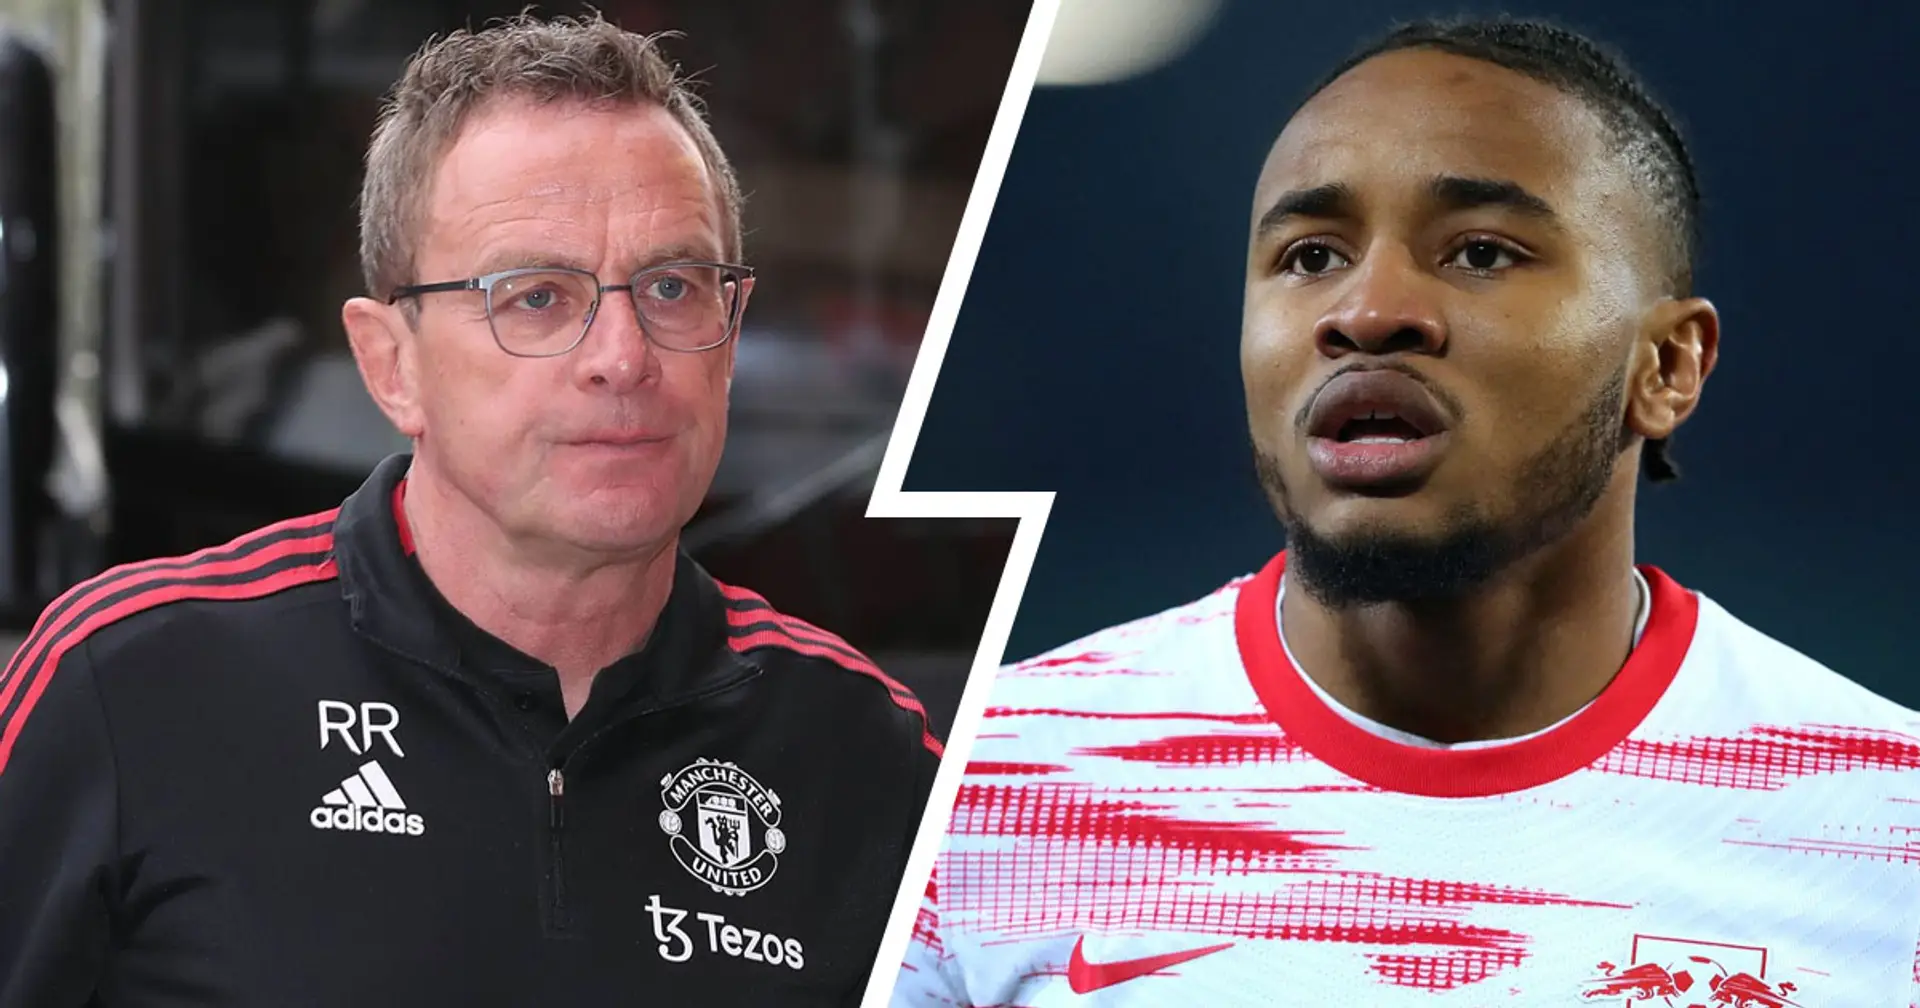 Man United showing interest in signing Christopher Nkunku & 2 more Bundesliga players (reliability: 4 stars)